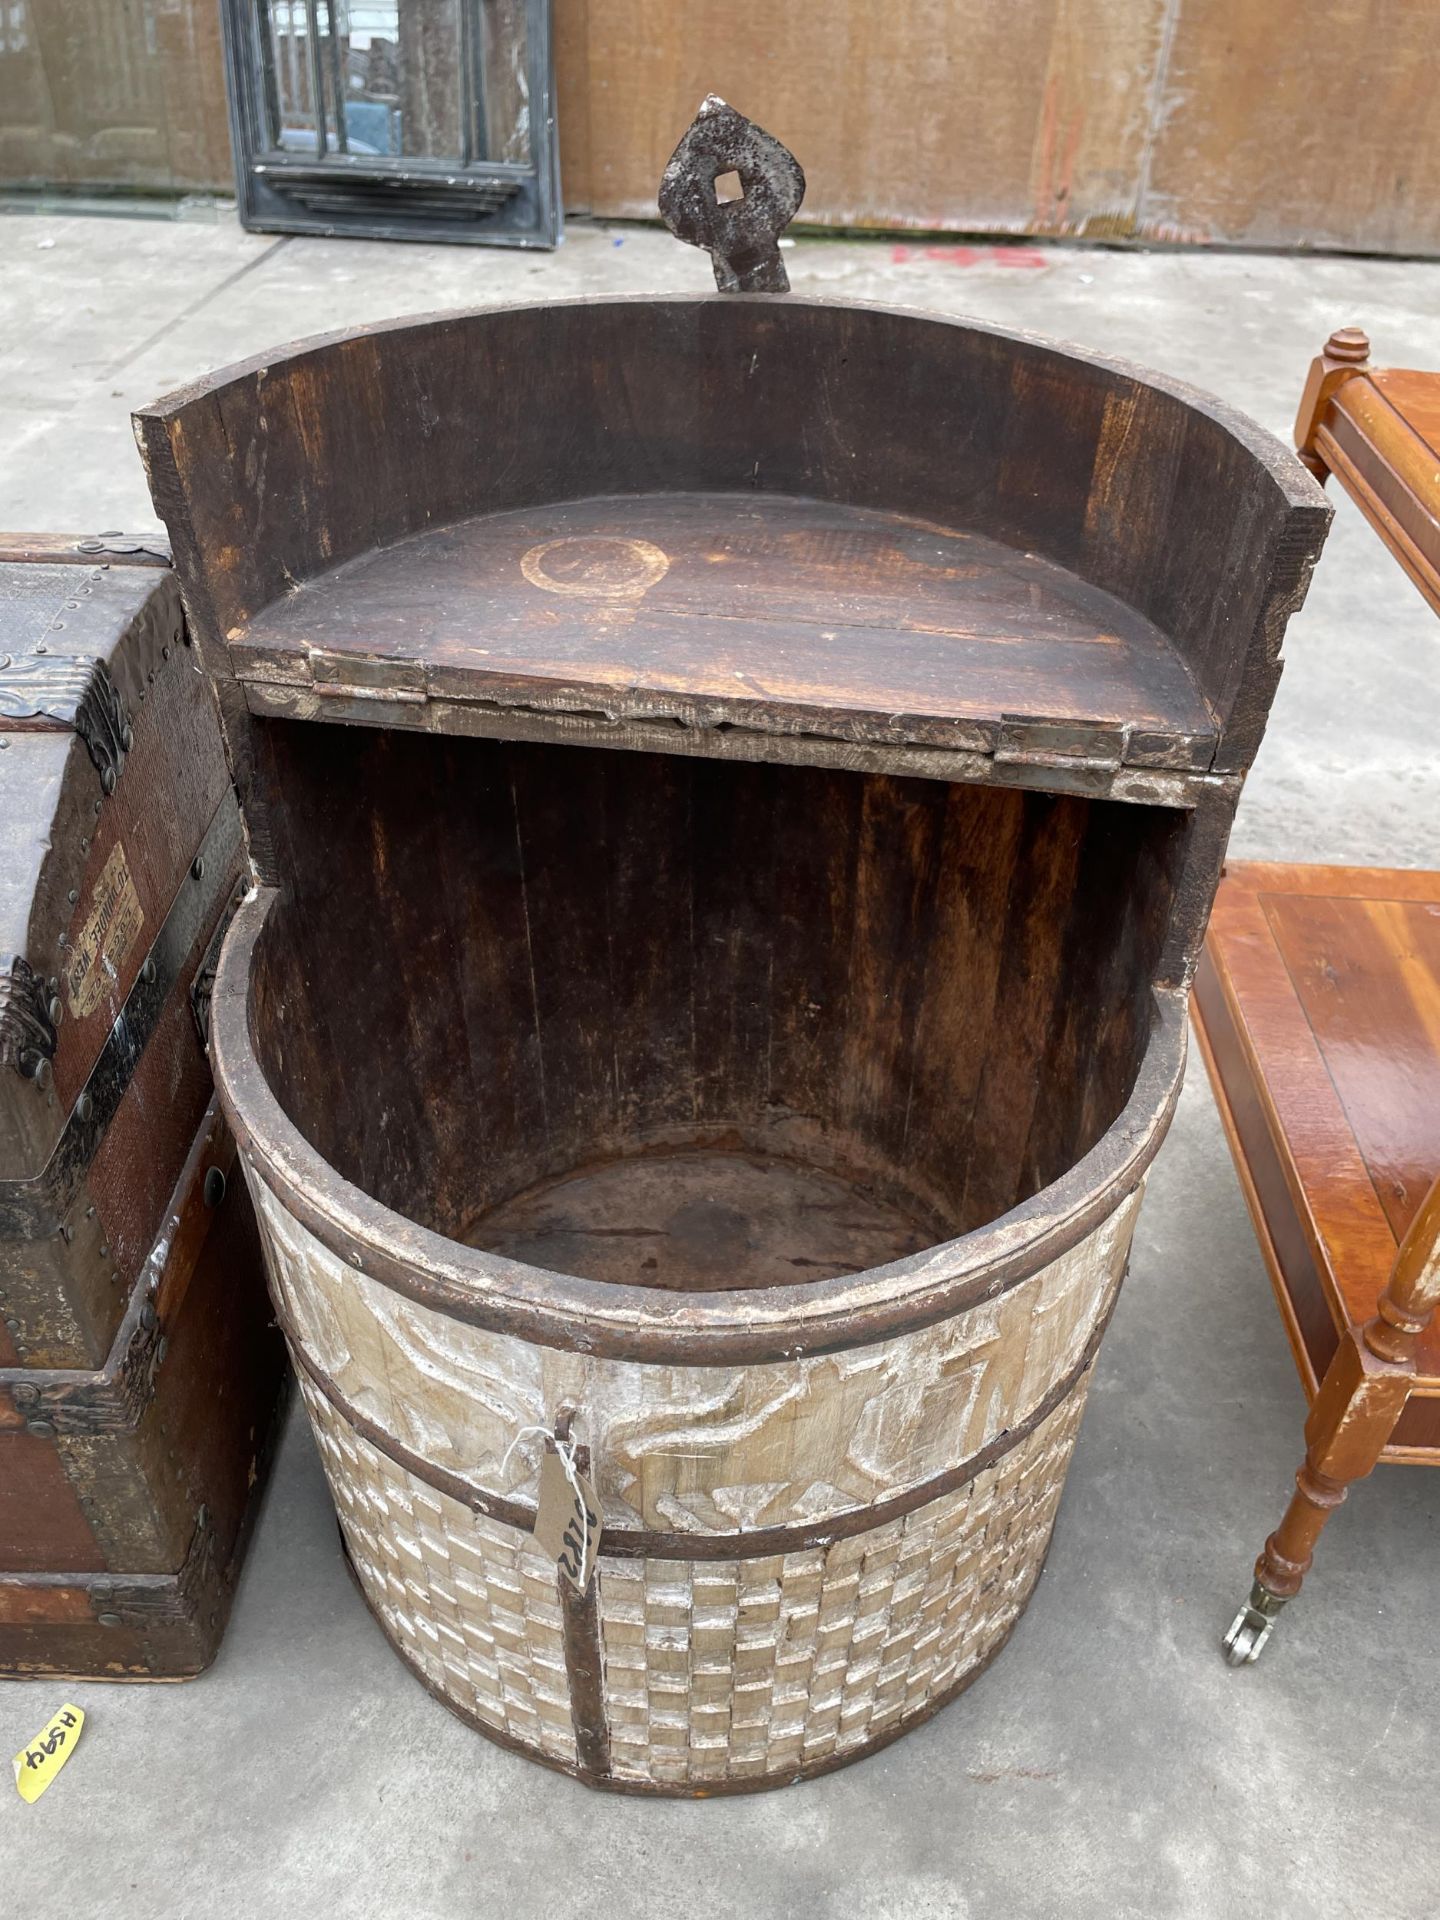 AN INDIAN HARDWOOD GRAIN/RICE DRUM CONTAINER WITH HINGED LID AND METALWARE FITTINGS DIAMETER 18" - Image 2 of 5